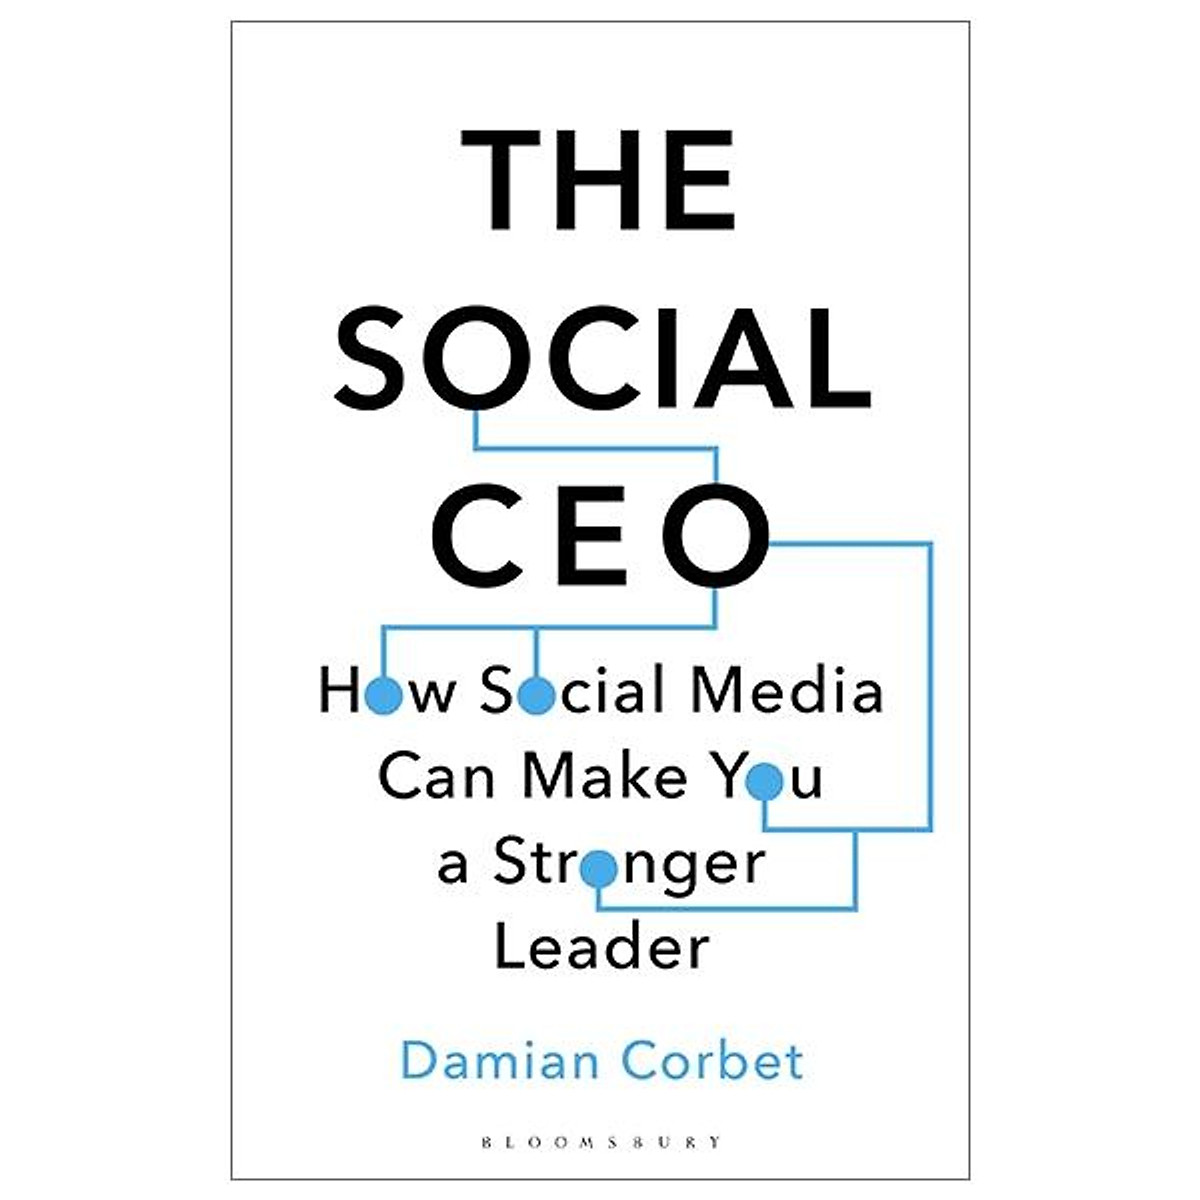 The Social CEO: How Social Media Can Make You A Stronger Leader